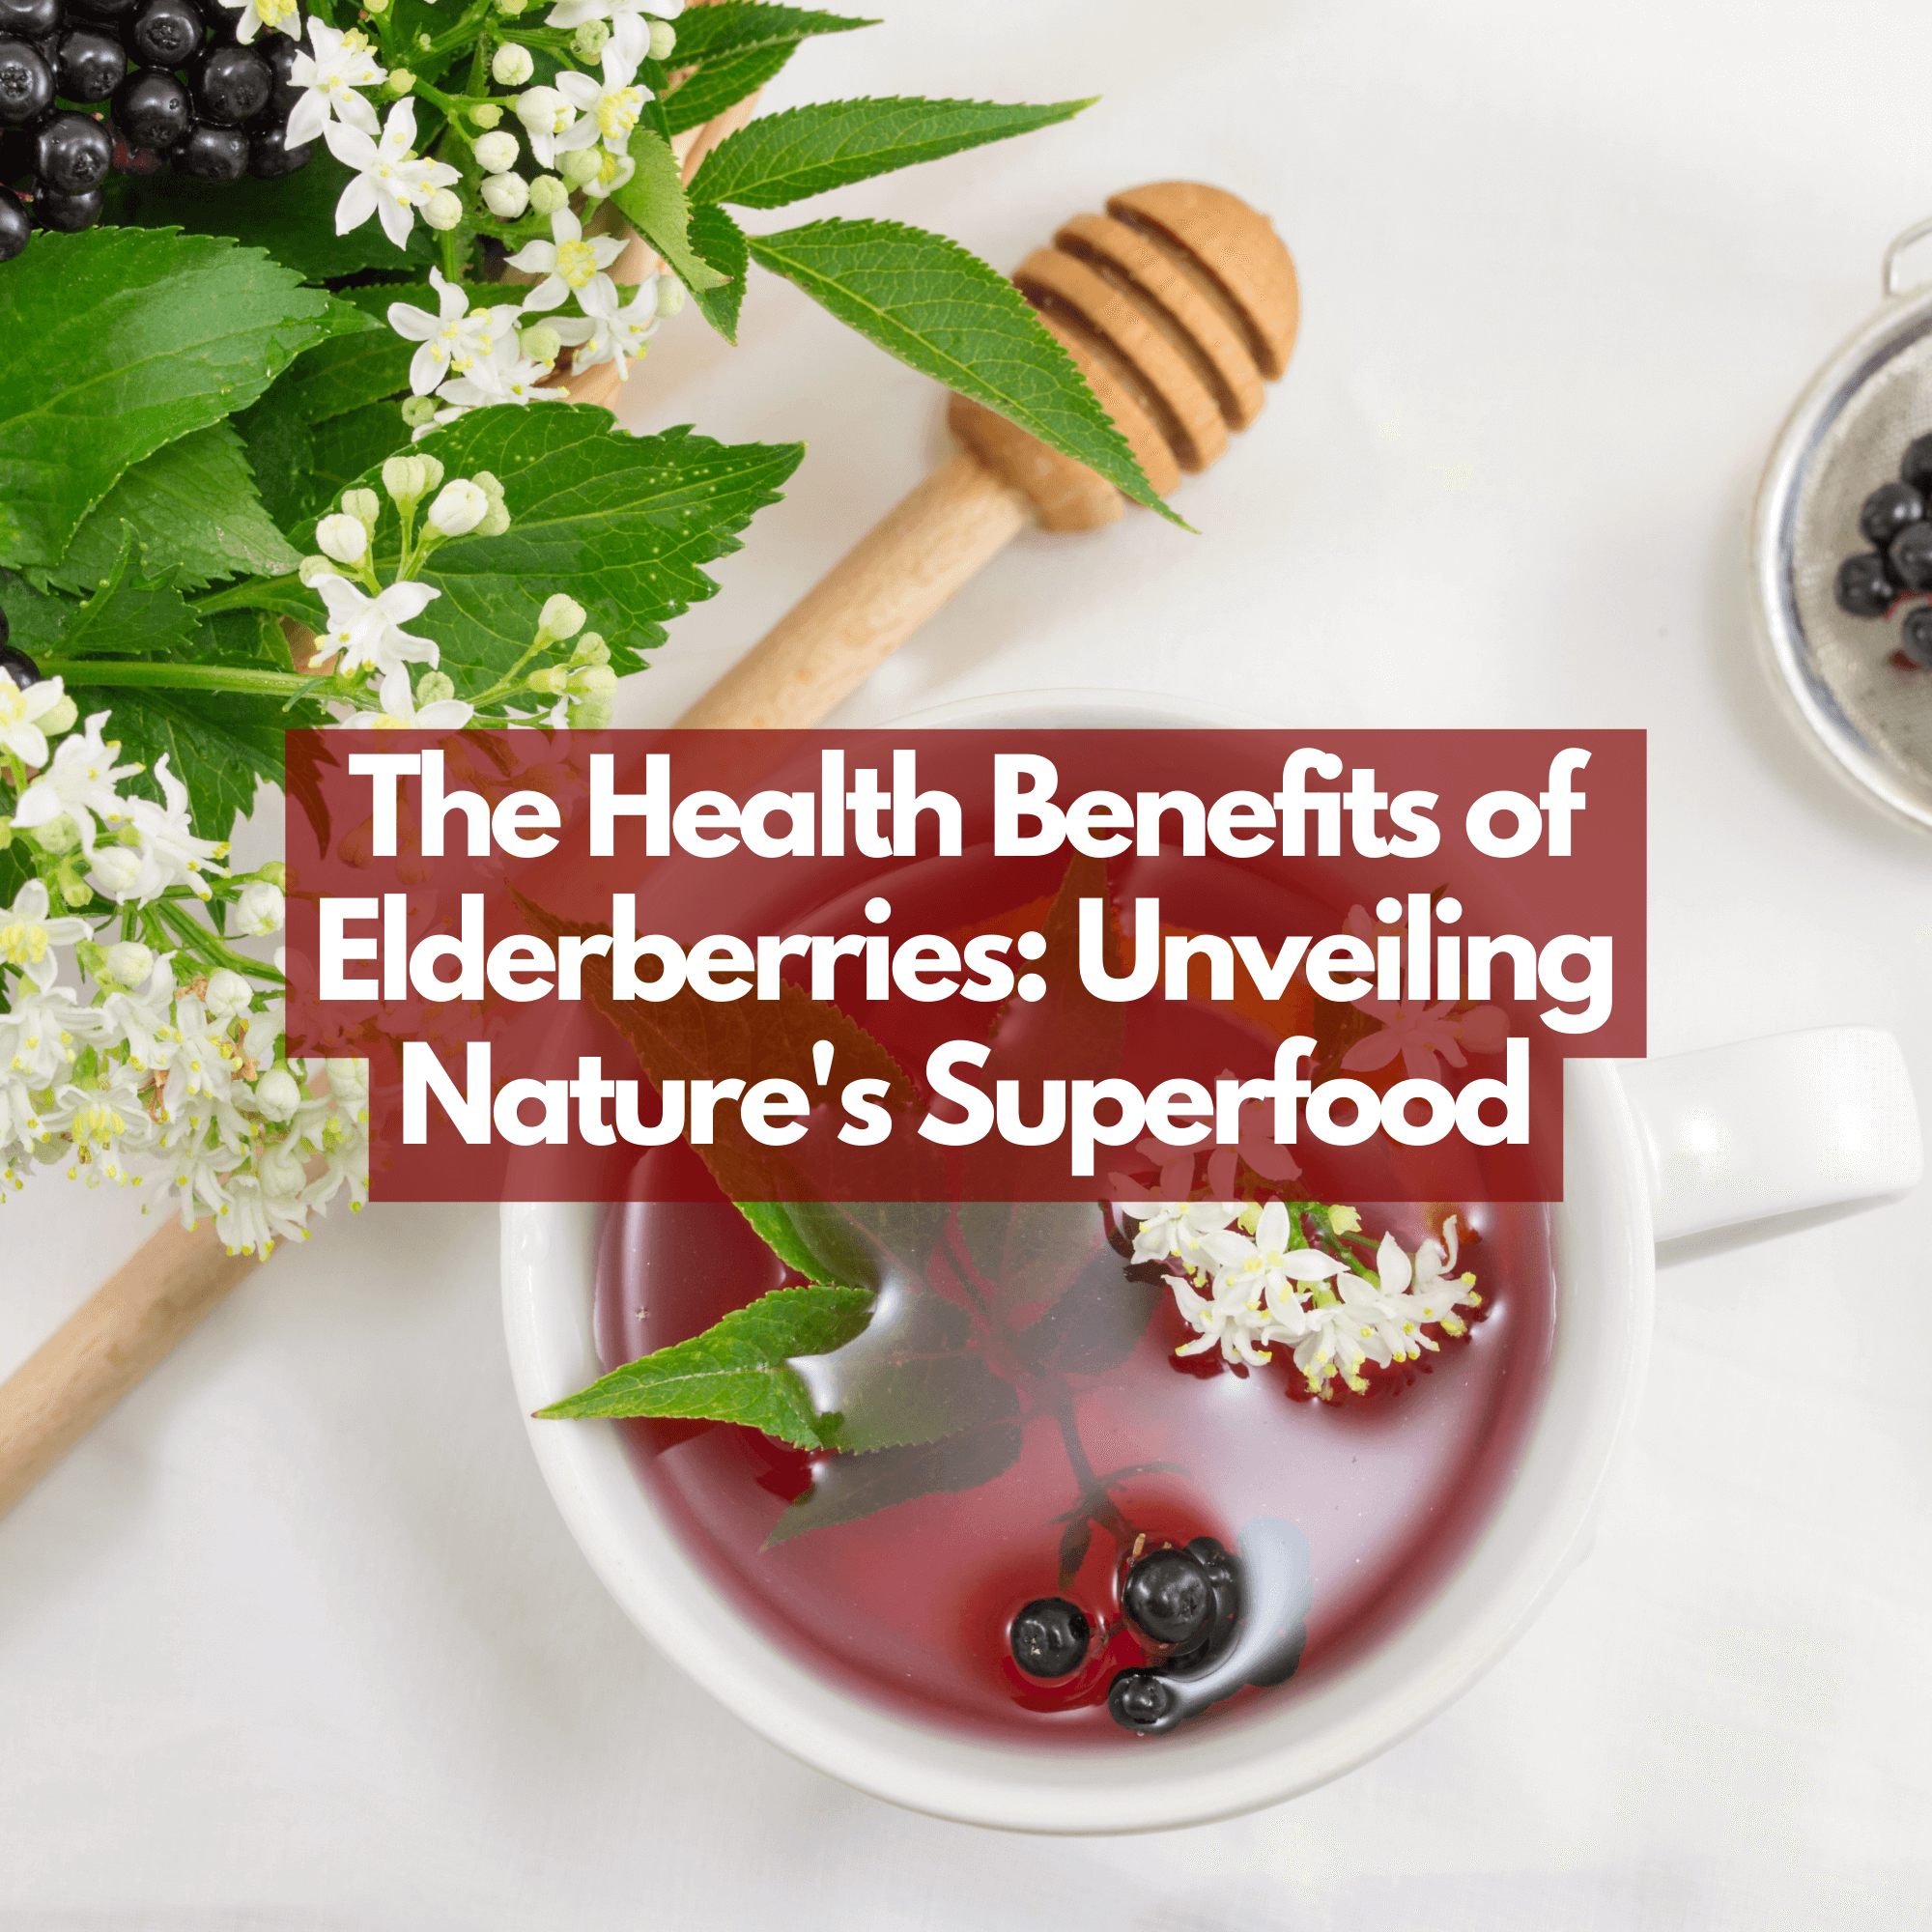 The Wonderful Health Benefits and Uses of Elderberry (the "Medicine Chest")